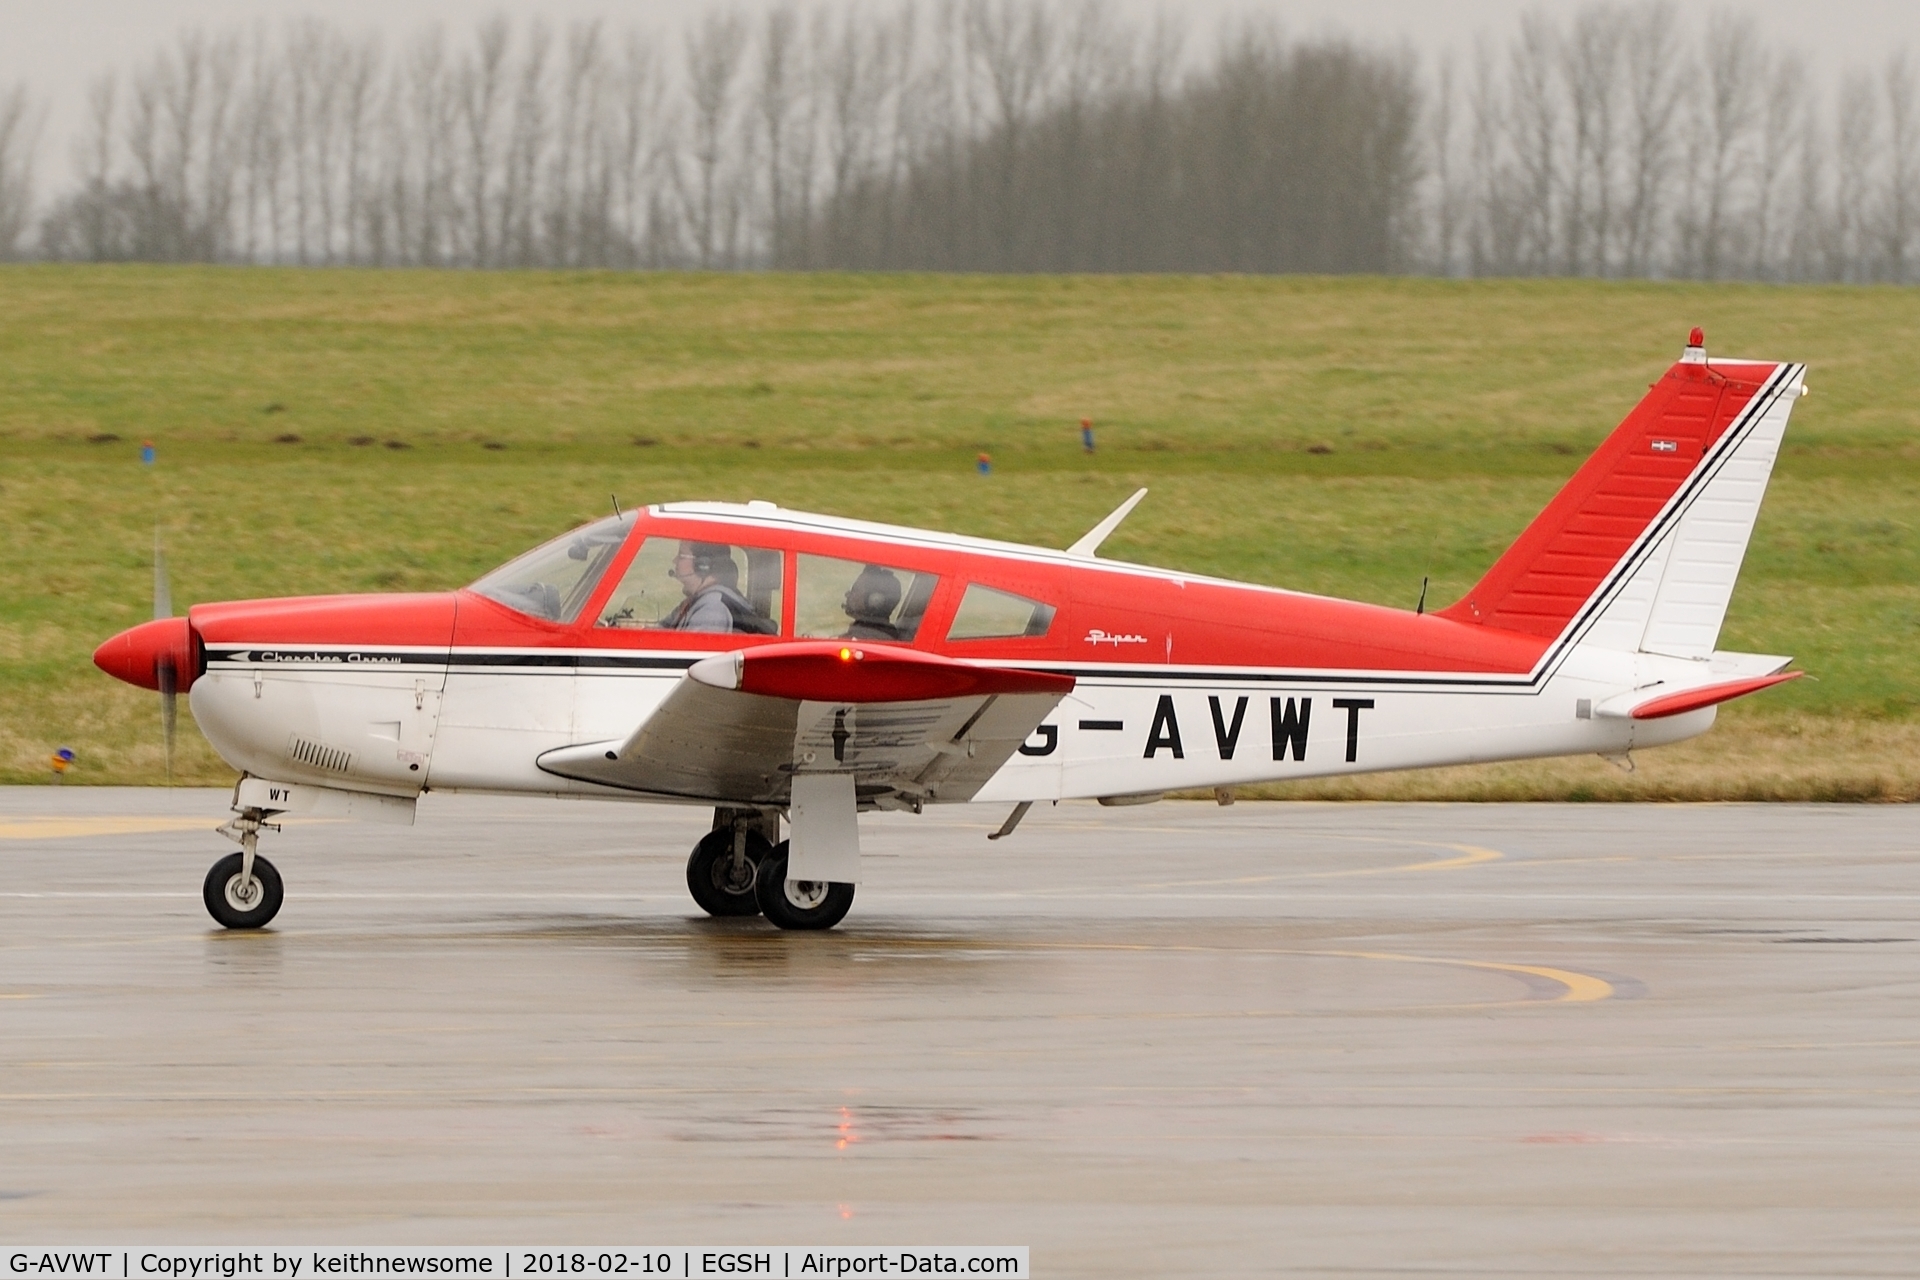 G-AVWT, 1968 Piper PA-28R-180 Cherokee Arrow C/N 28R-30362, Arriving at Norwich from Cambridge.